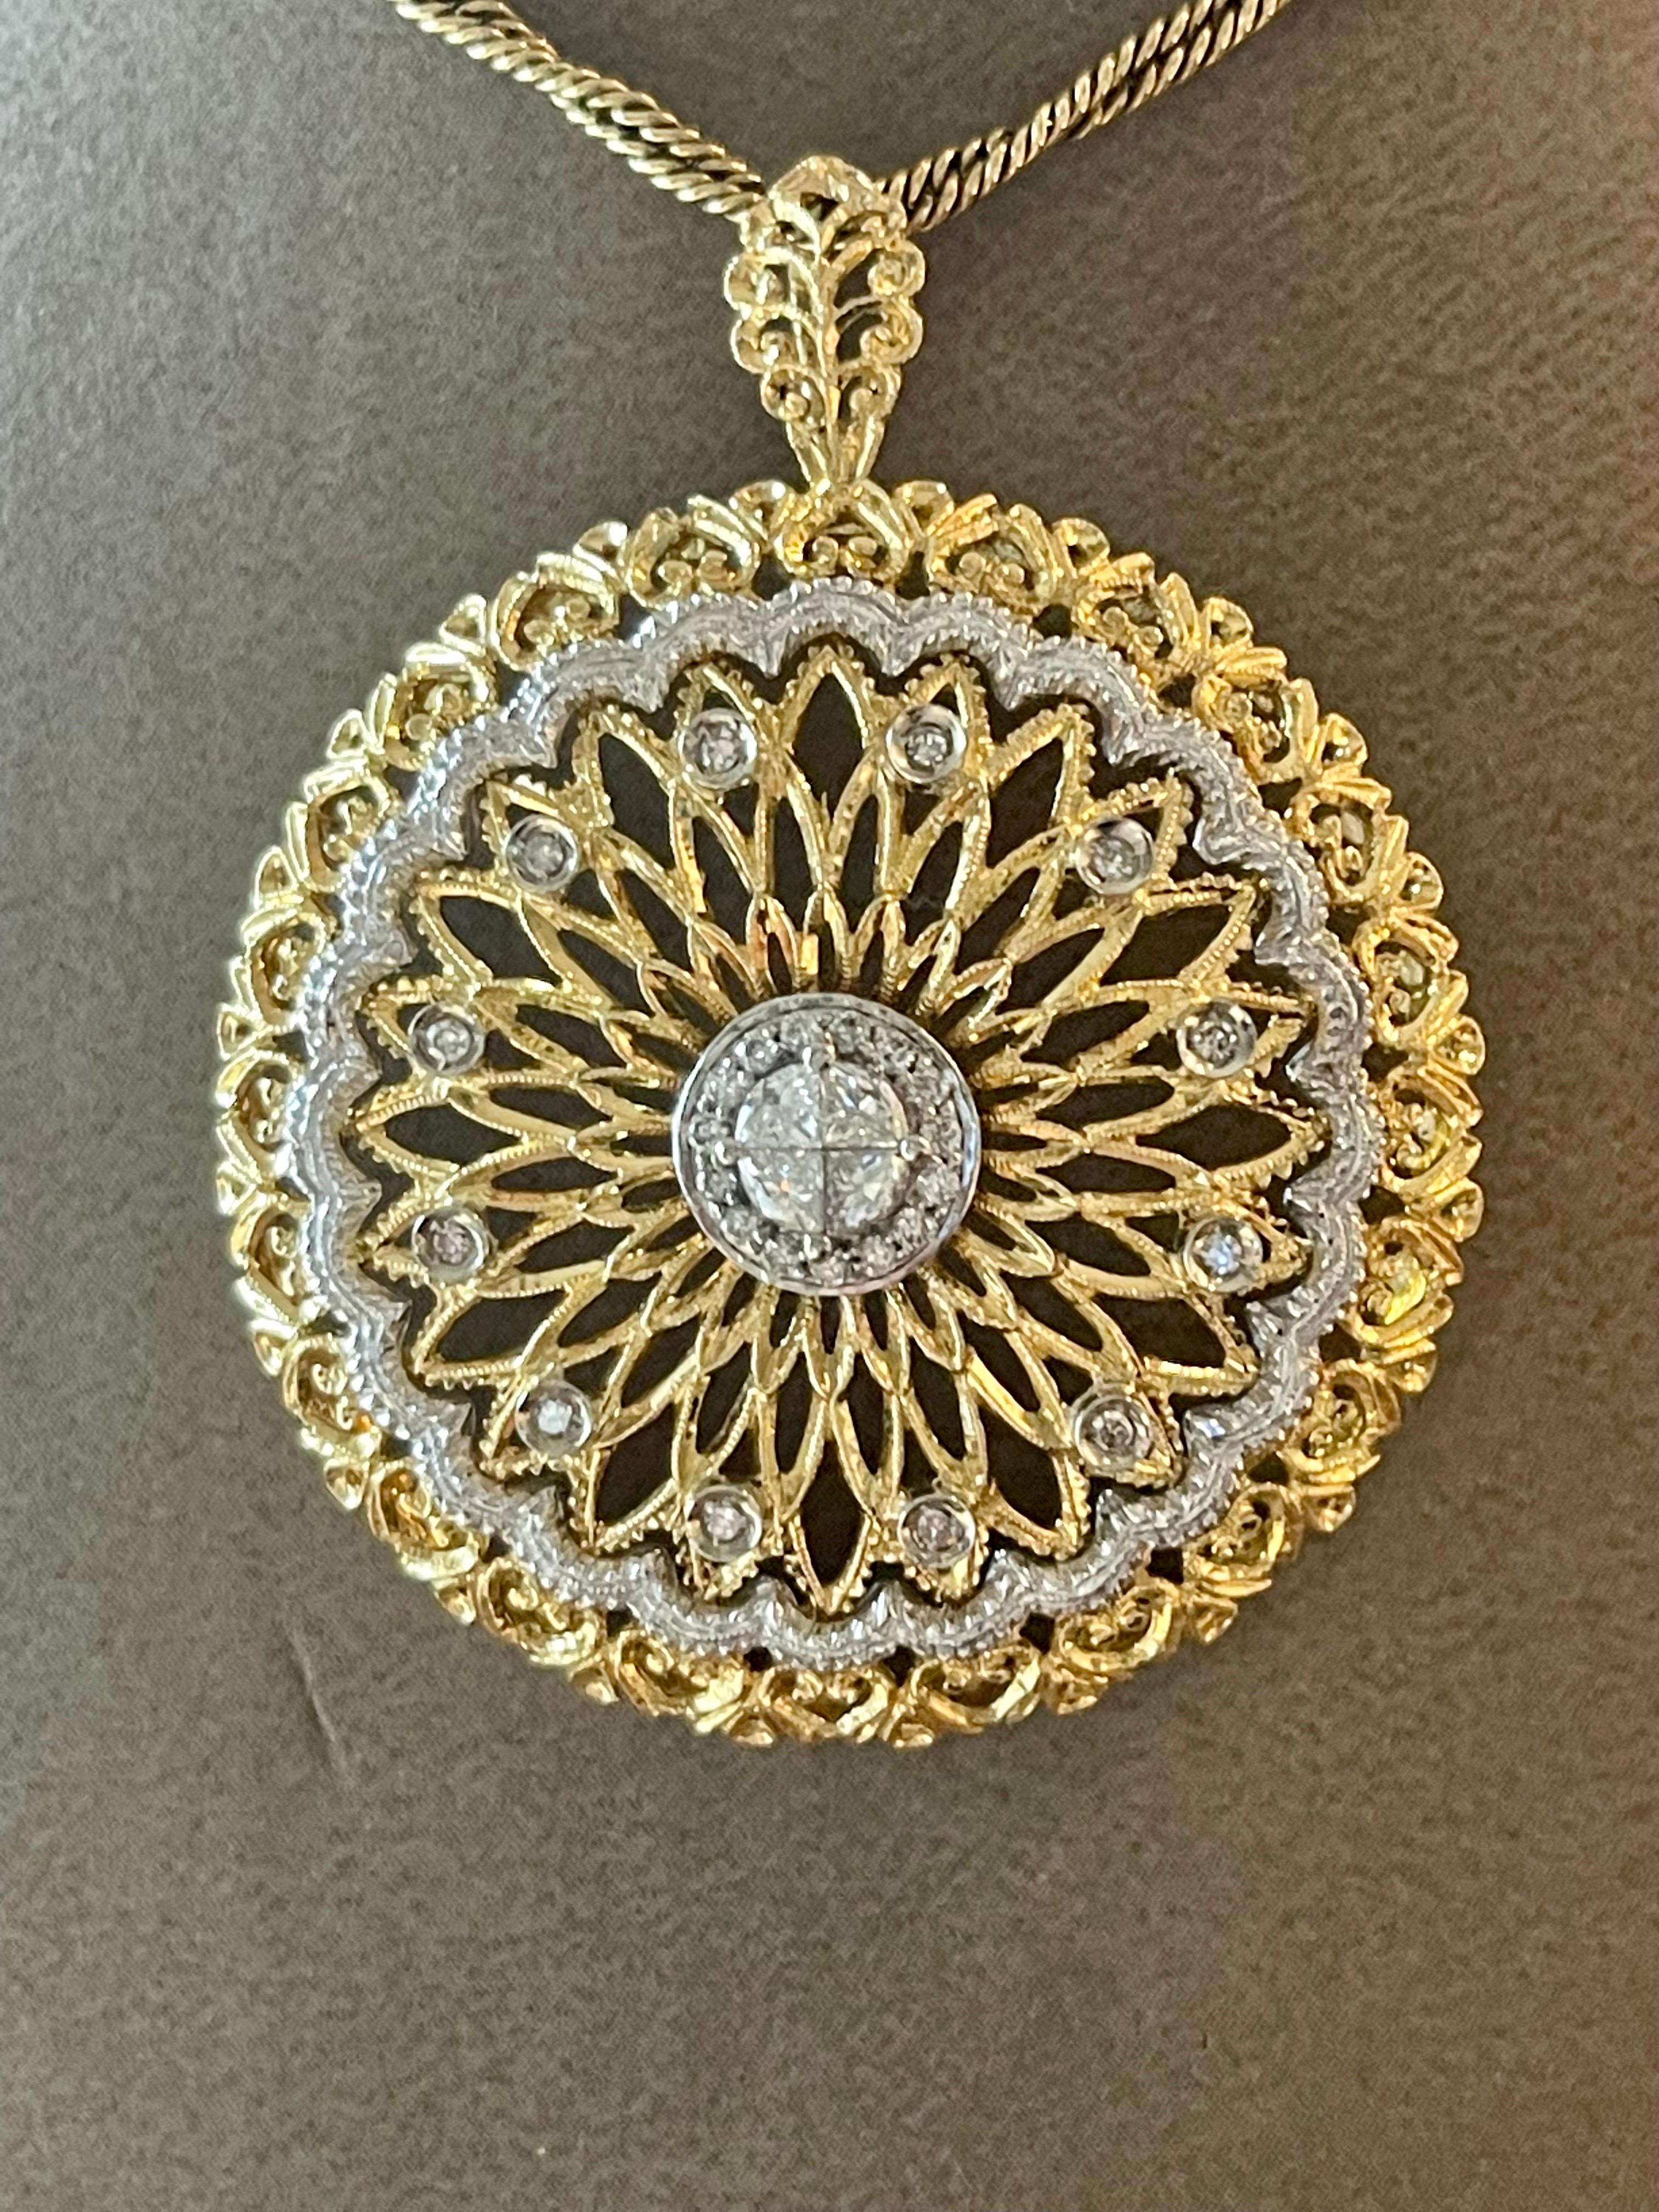 Lovely 18 K yellow and white Gold open work filigree pendant and chain. Set with tiny brilliant cut Diamonds. Finished with milgrain edges.
The length of the chain is 41.5 cm. Total weight 22.56 grams. Dimension of pendant: width 3.90 cm and height